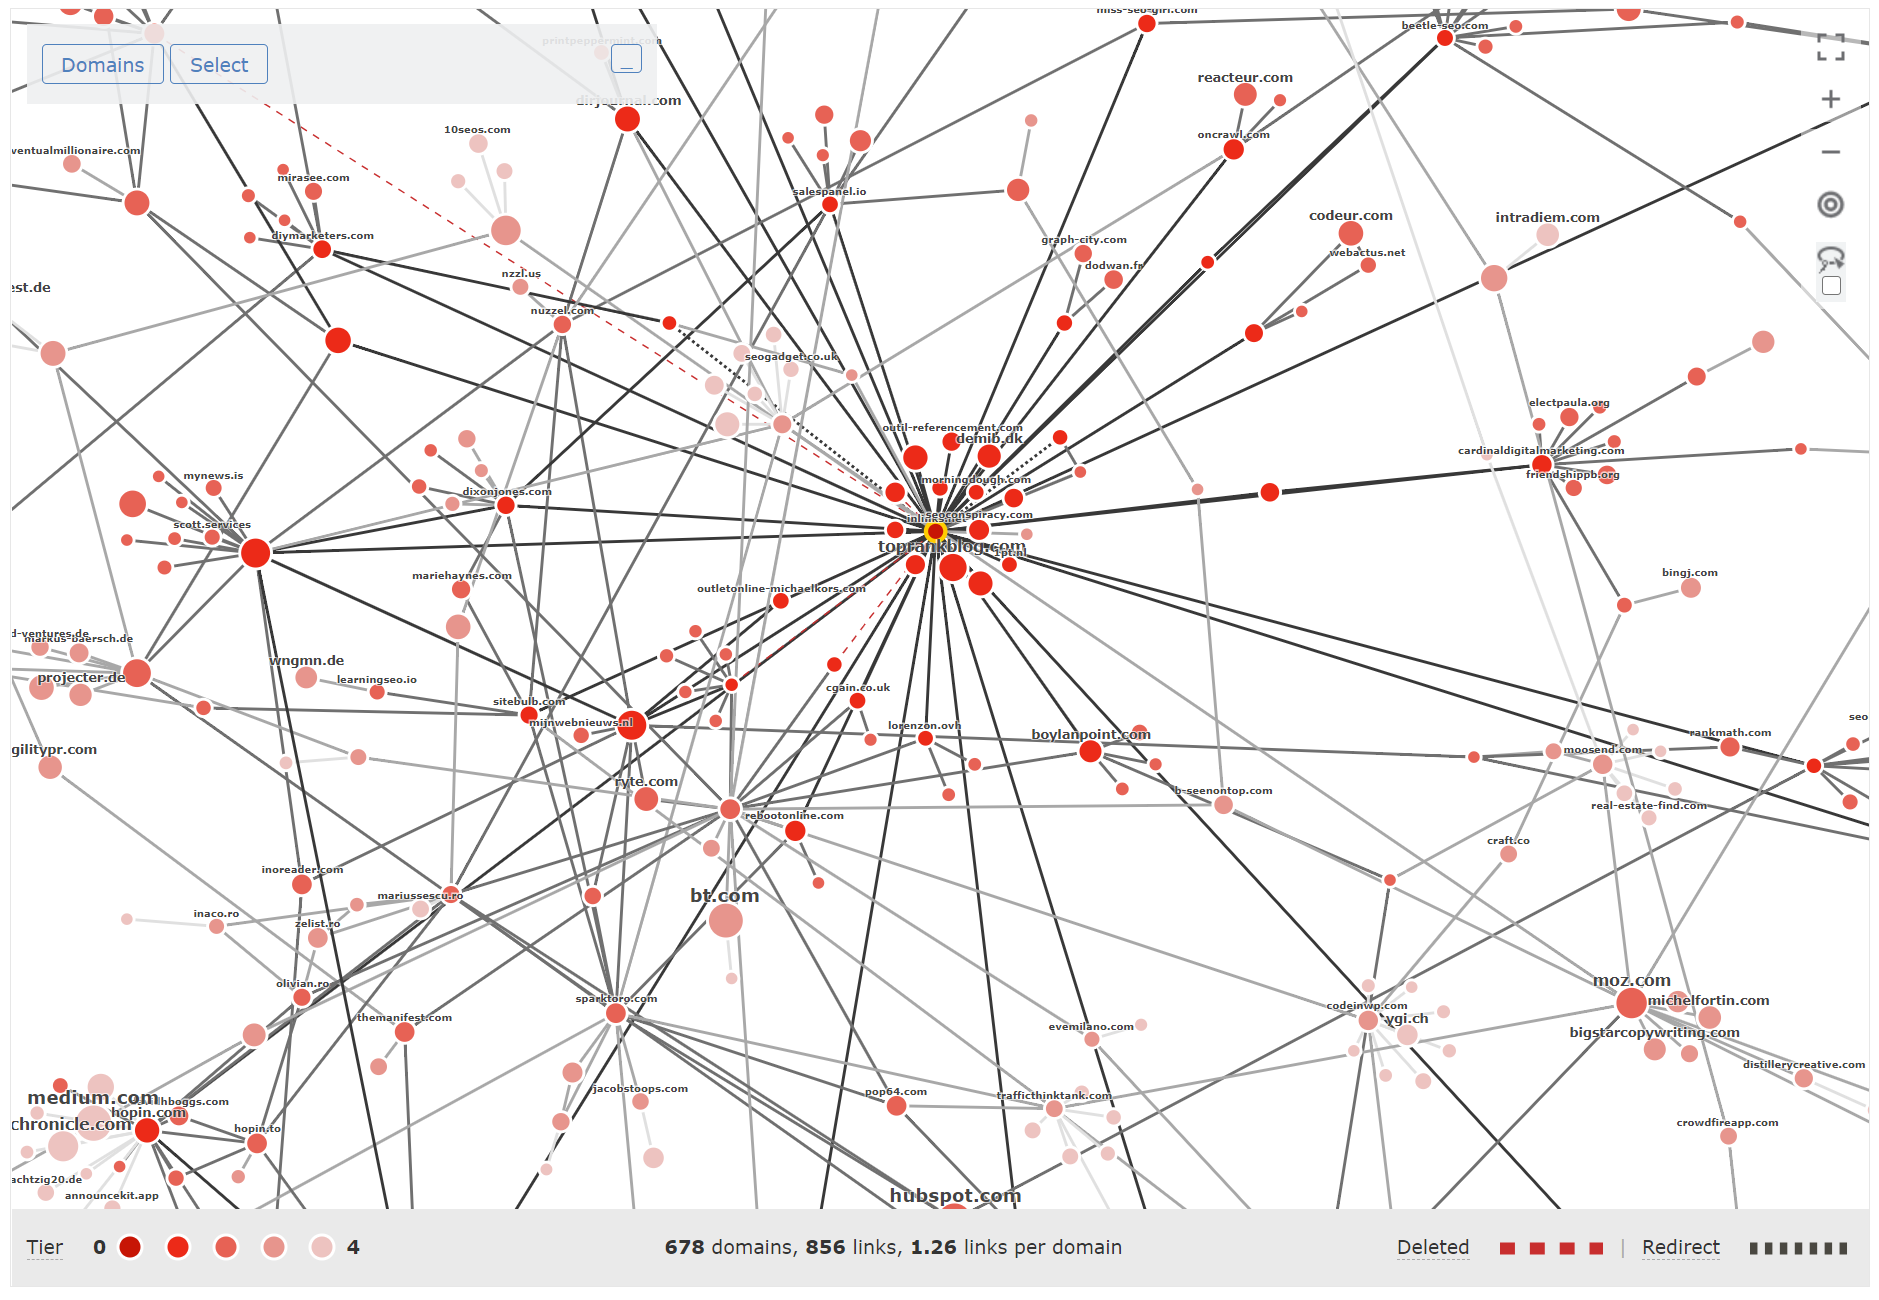 Majestic Link Graph for inlinks